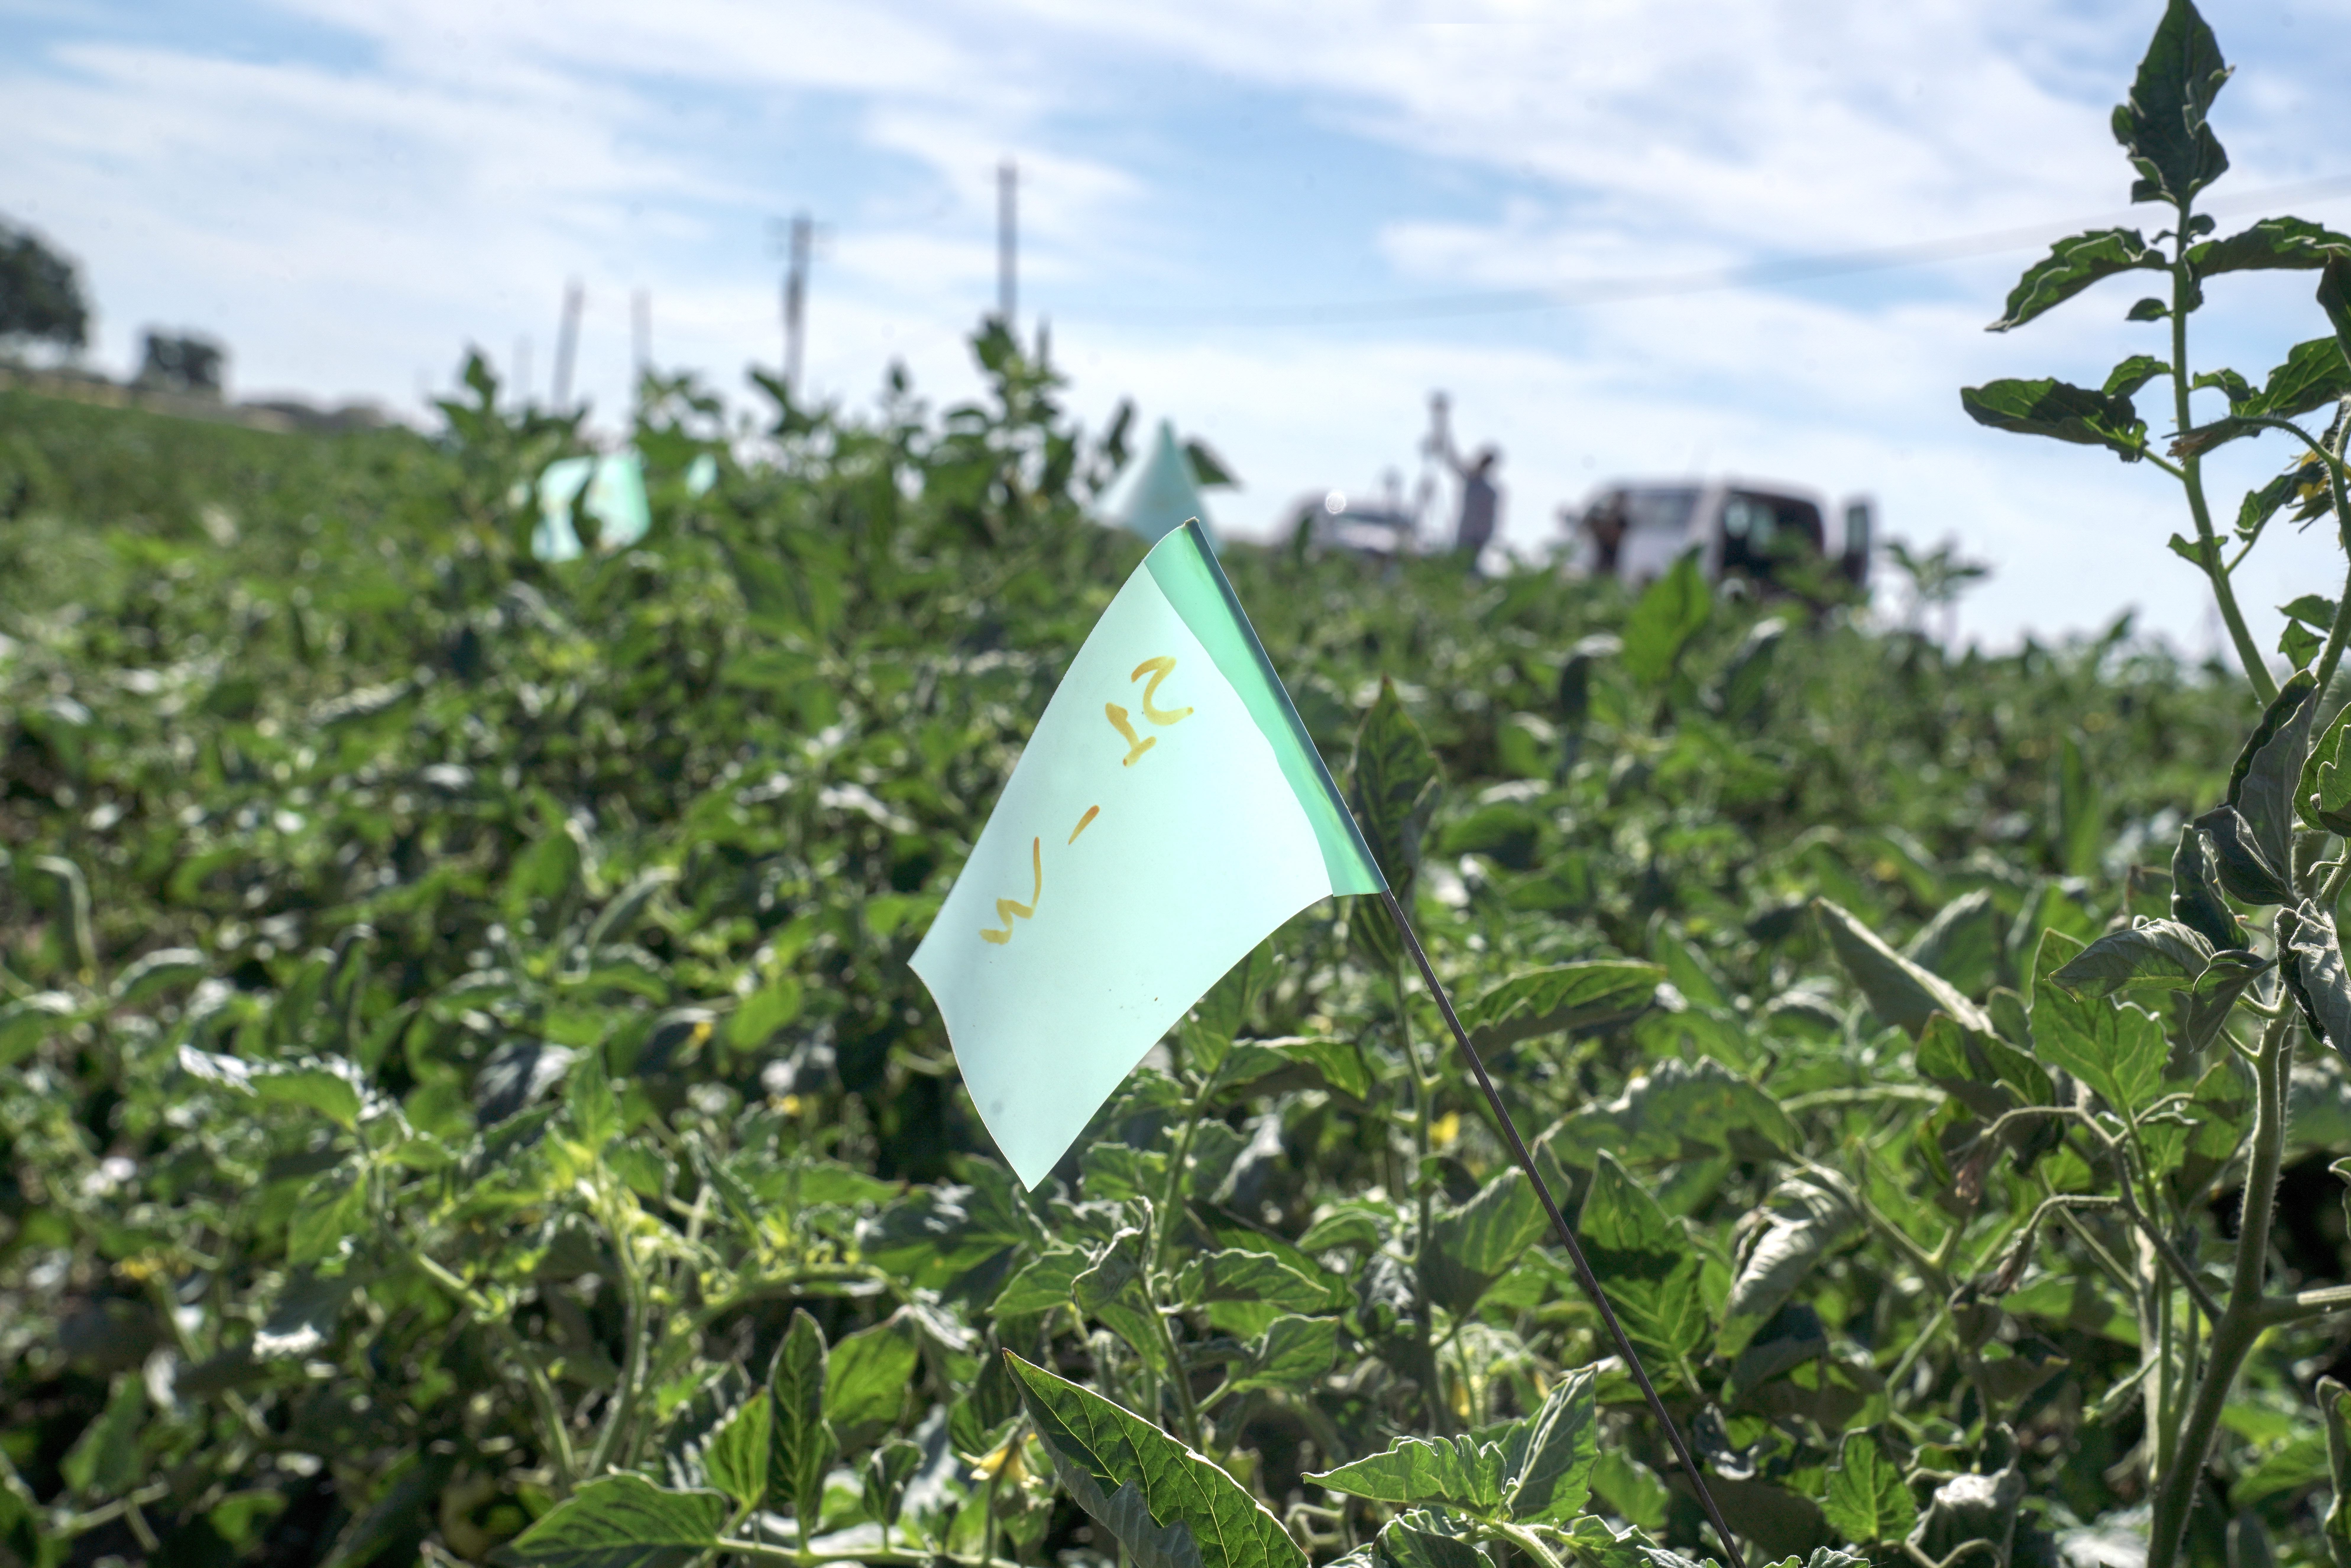 Flags marking tomato plants with weeds attached